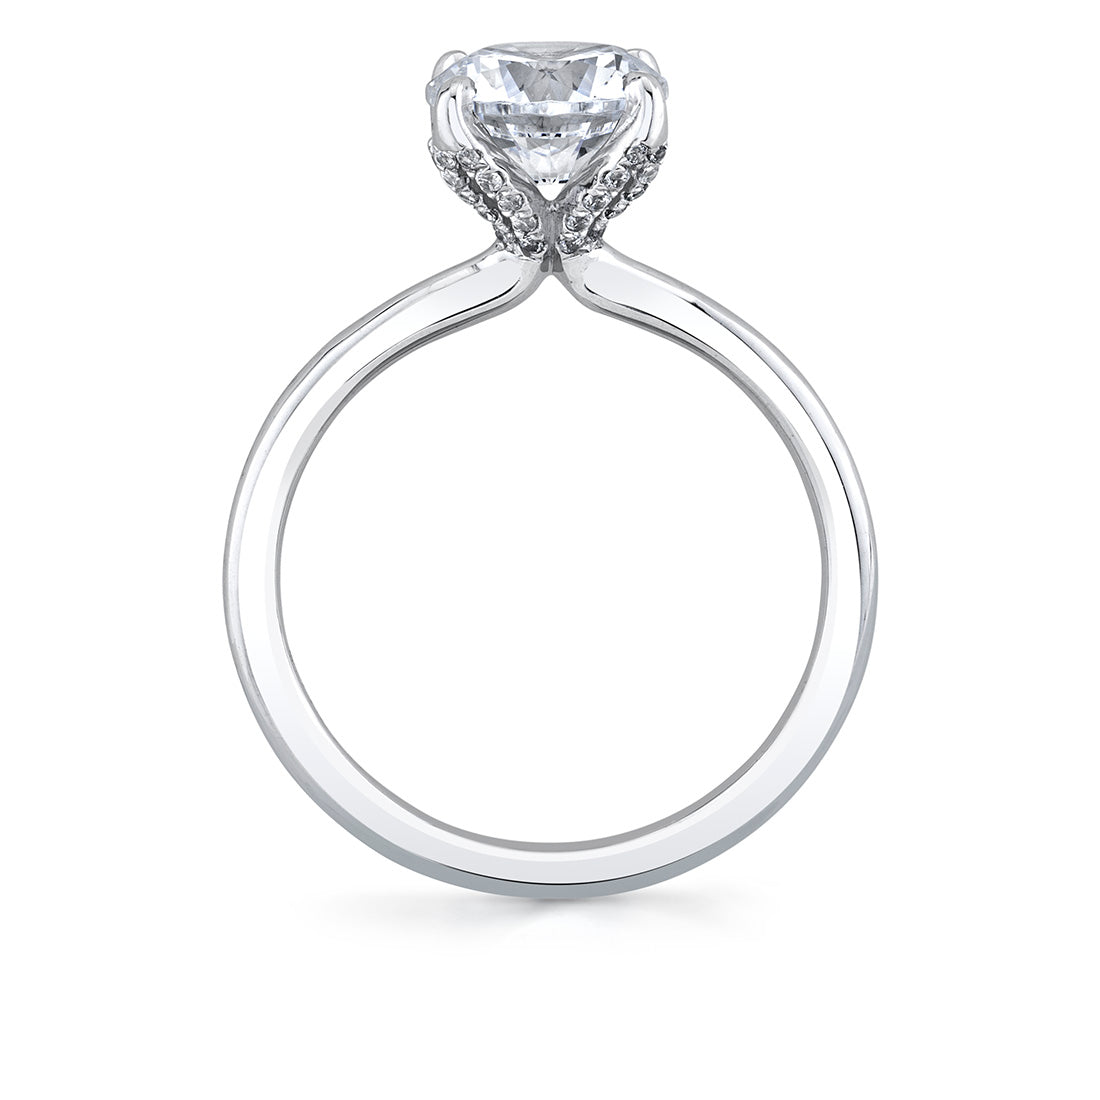 Althaia | 14kt White Gold Round Cut Diamond Prong Solitaire Engagement Ring